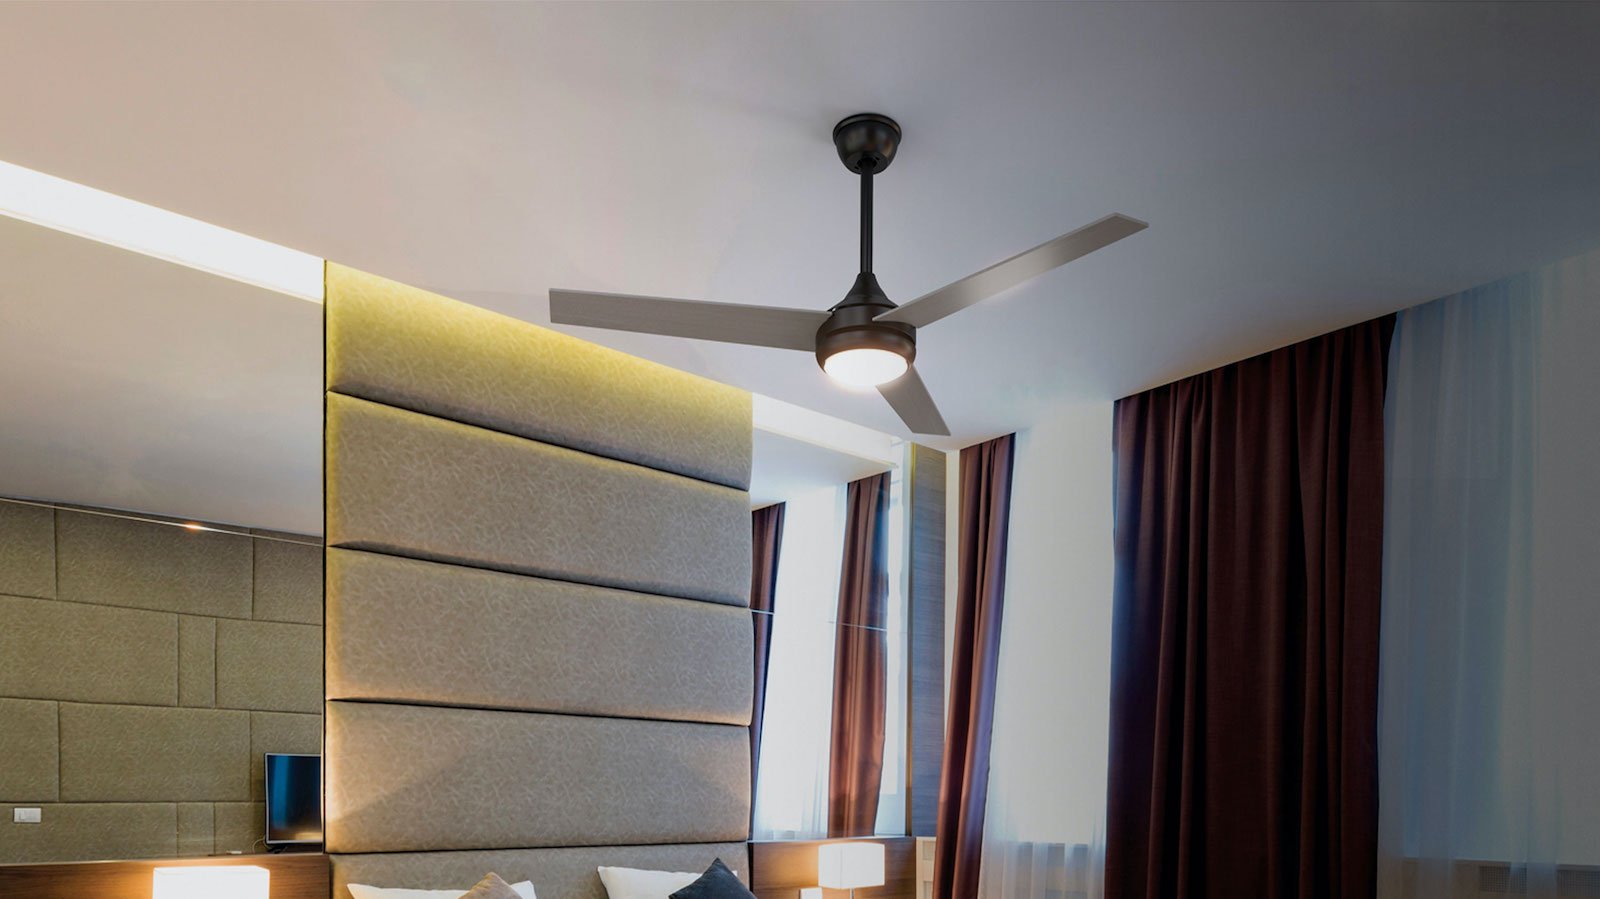 Atomi Smart Ceiling Fan cools and circulates the air in rooms as large as 400 square feet